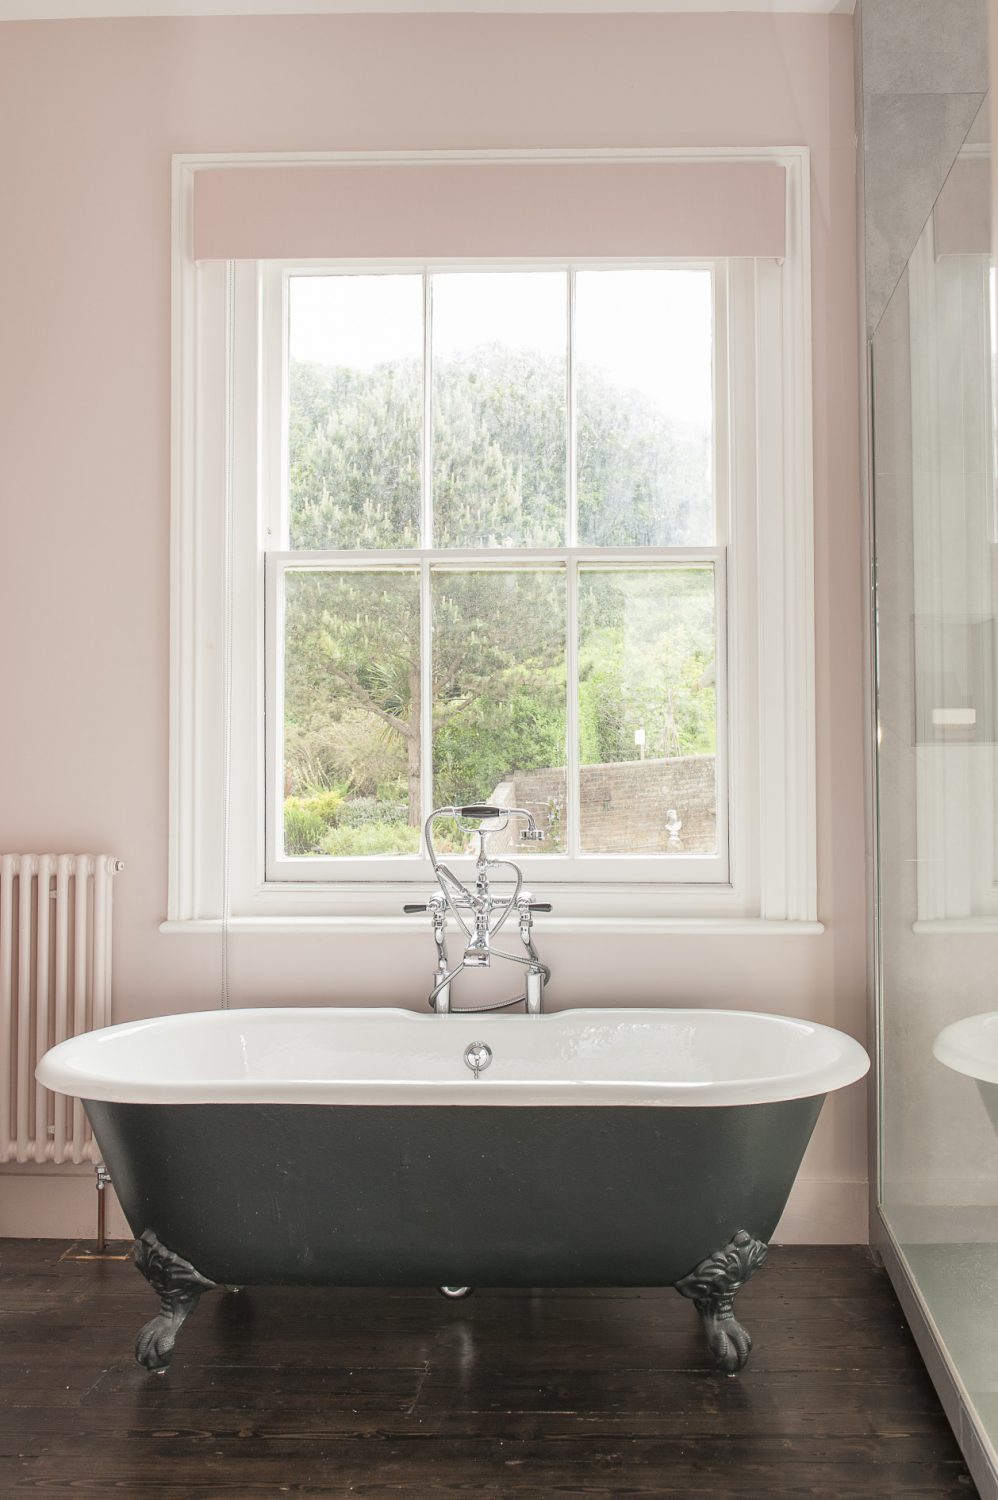 There is an equally lovely view from the bath - over a planted sedum flat roof and their neighbour’s beautiful garden, up to Hastings Country Park. The bathroom fittings are from CP Hart